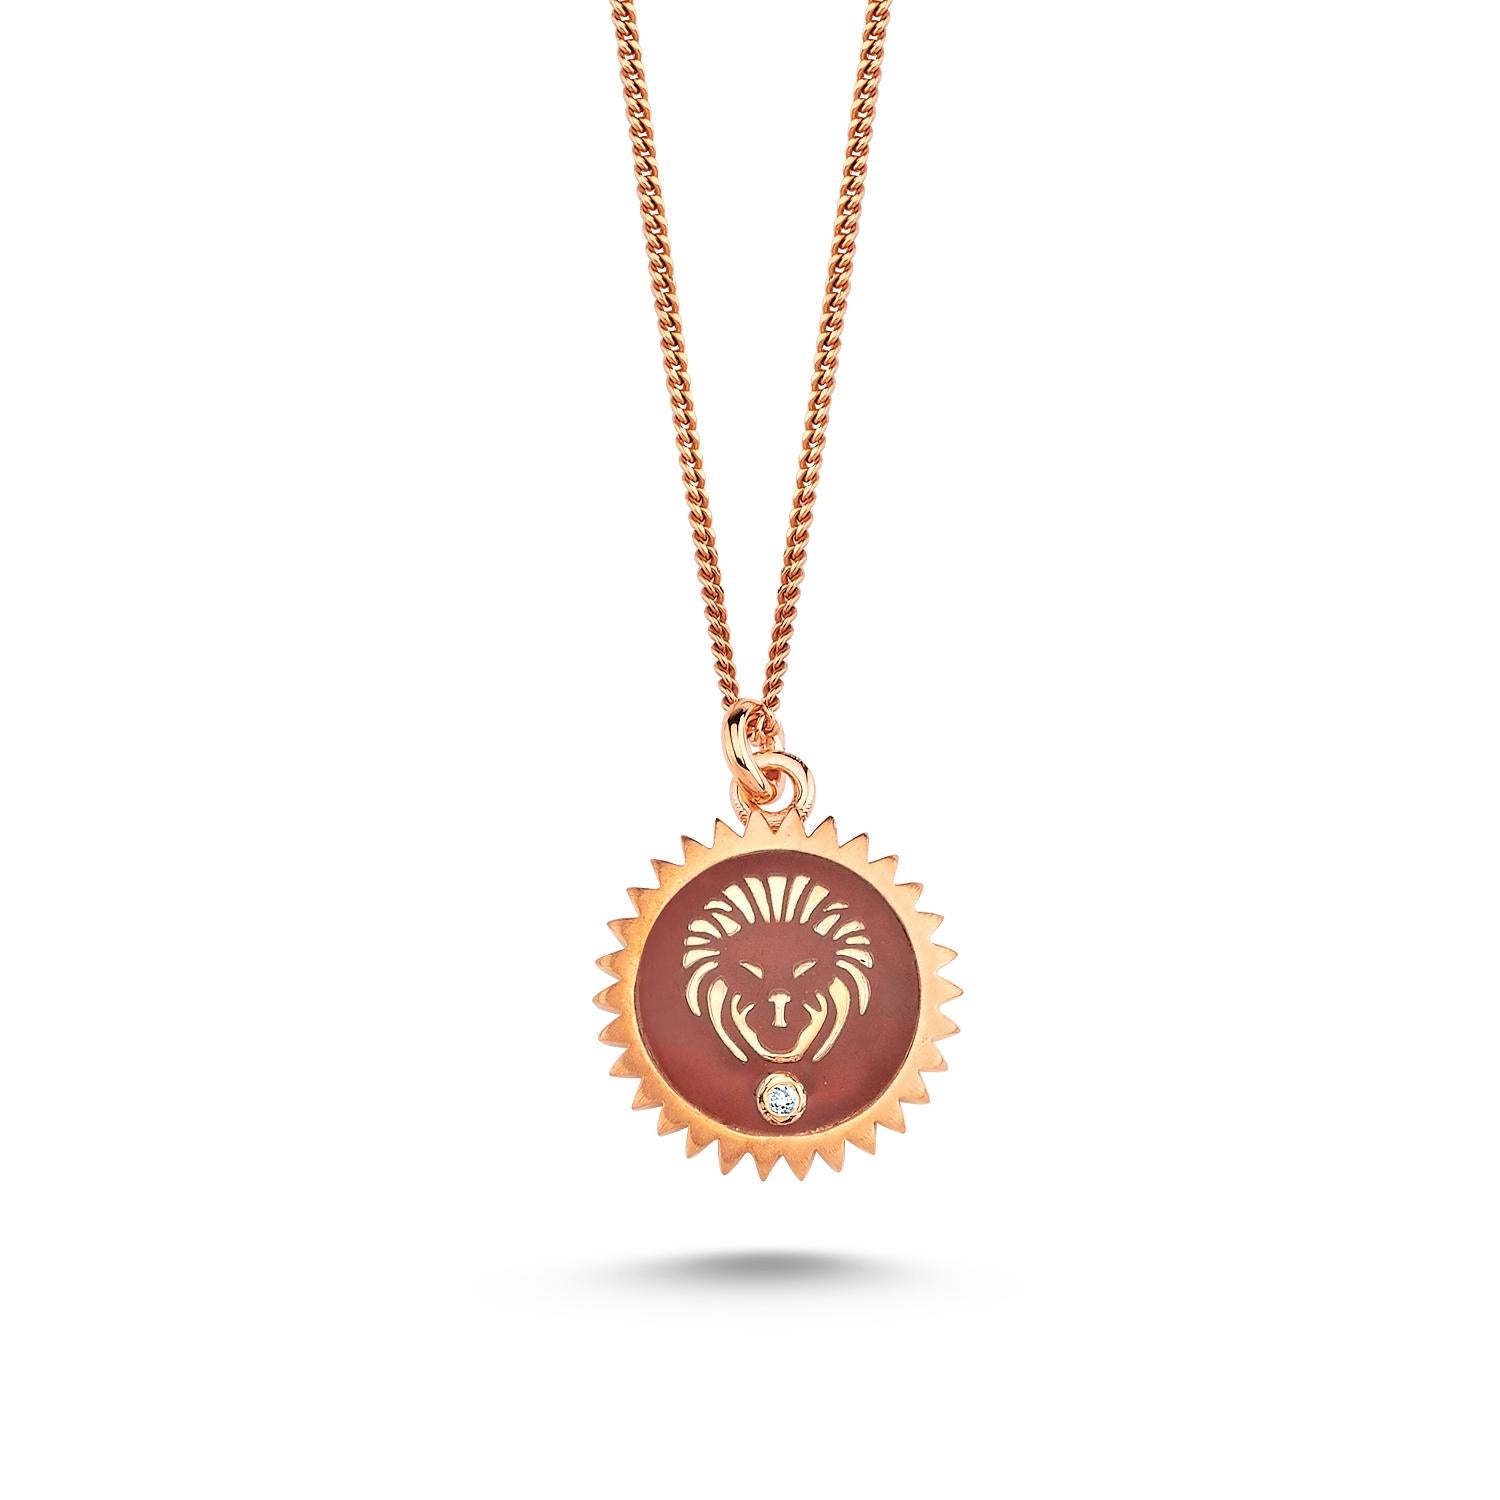 Leo necklace with coral enamel & white diamond in rose gold by Selda Jewellery

Additional Information:-
Collection: Zodiac Collection
14k Rose gold
0.01ct White diamond
Pendant height 1cm
Chain length 40cm